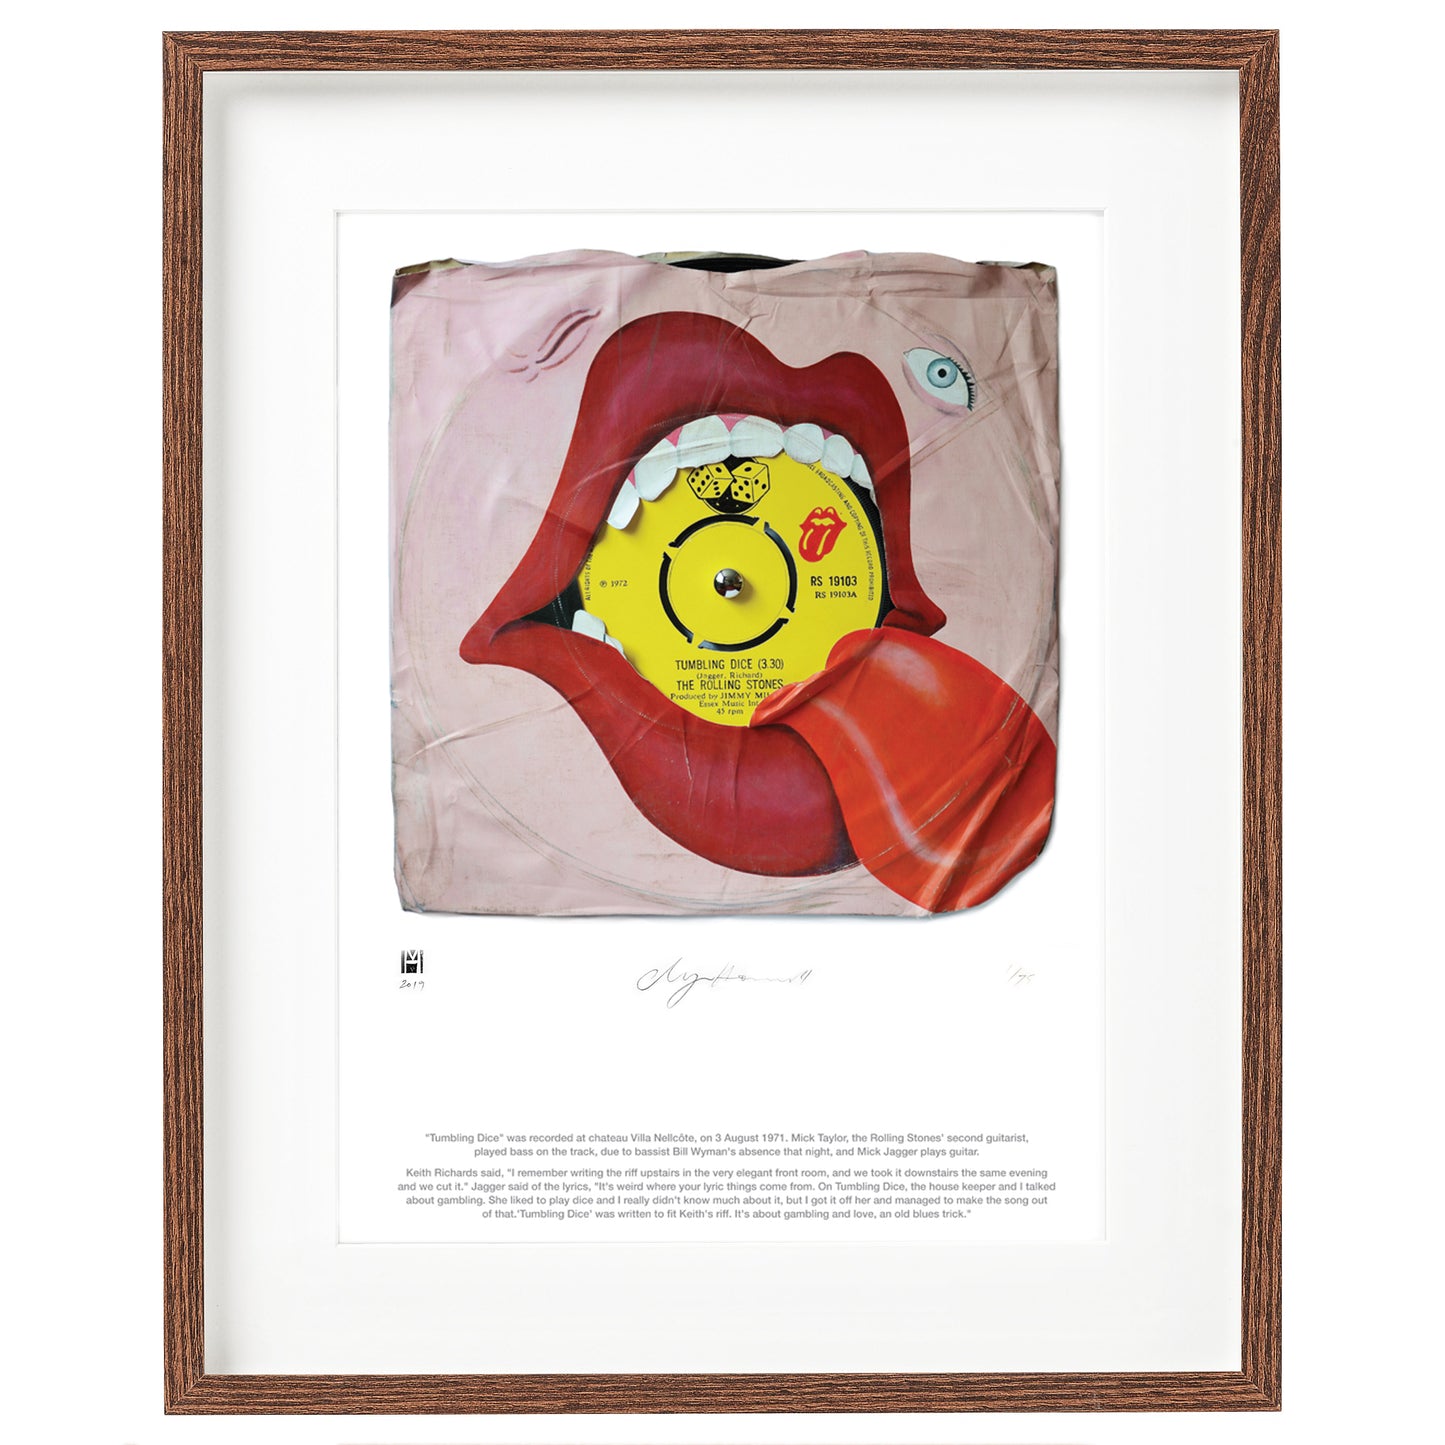 Tumbling Dice'' by The Rolling Stones Limited Edition Prints of Original Painting